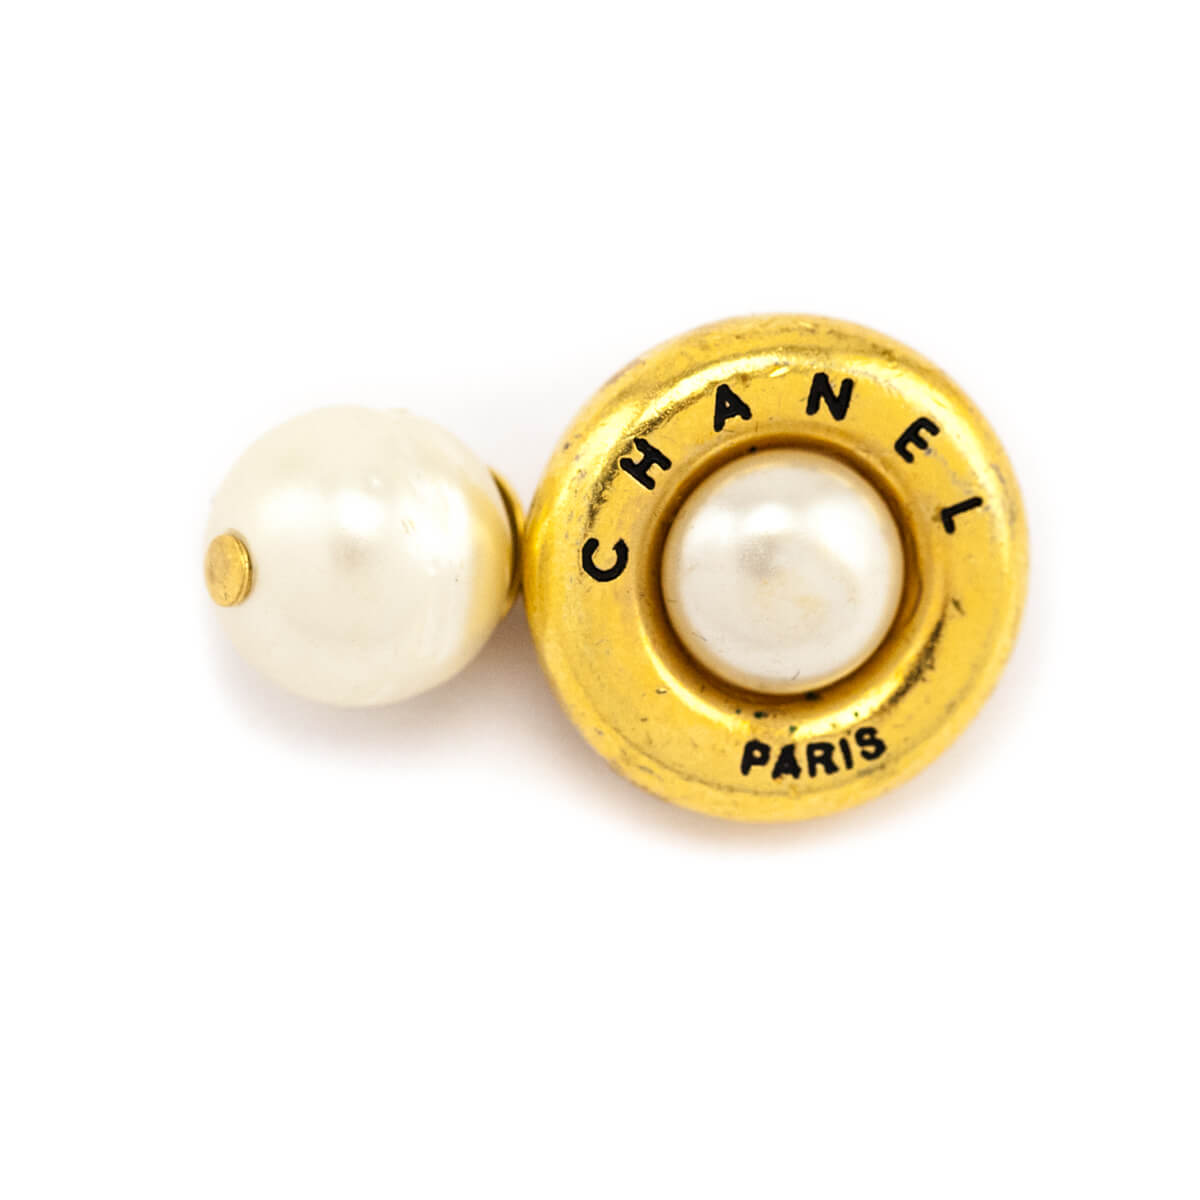 Chanel Pearl Vintage Cuff Links - Love that Bag etc - Preowned Authentic Designer Handbags & Preloved Fashions